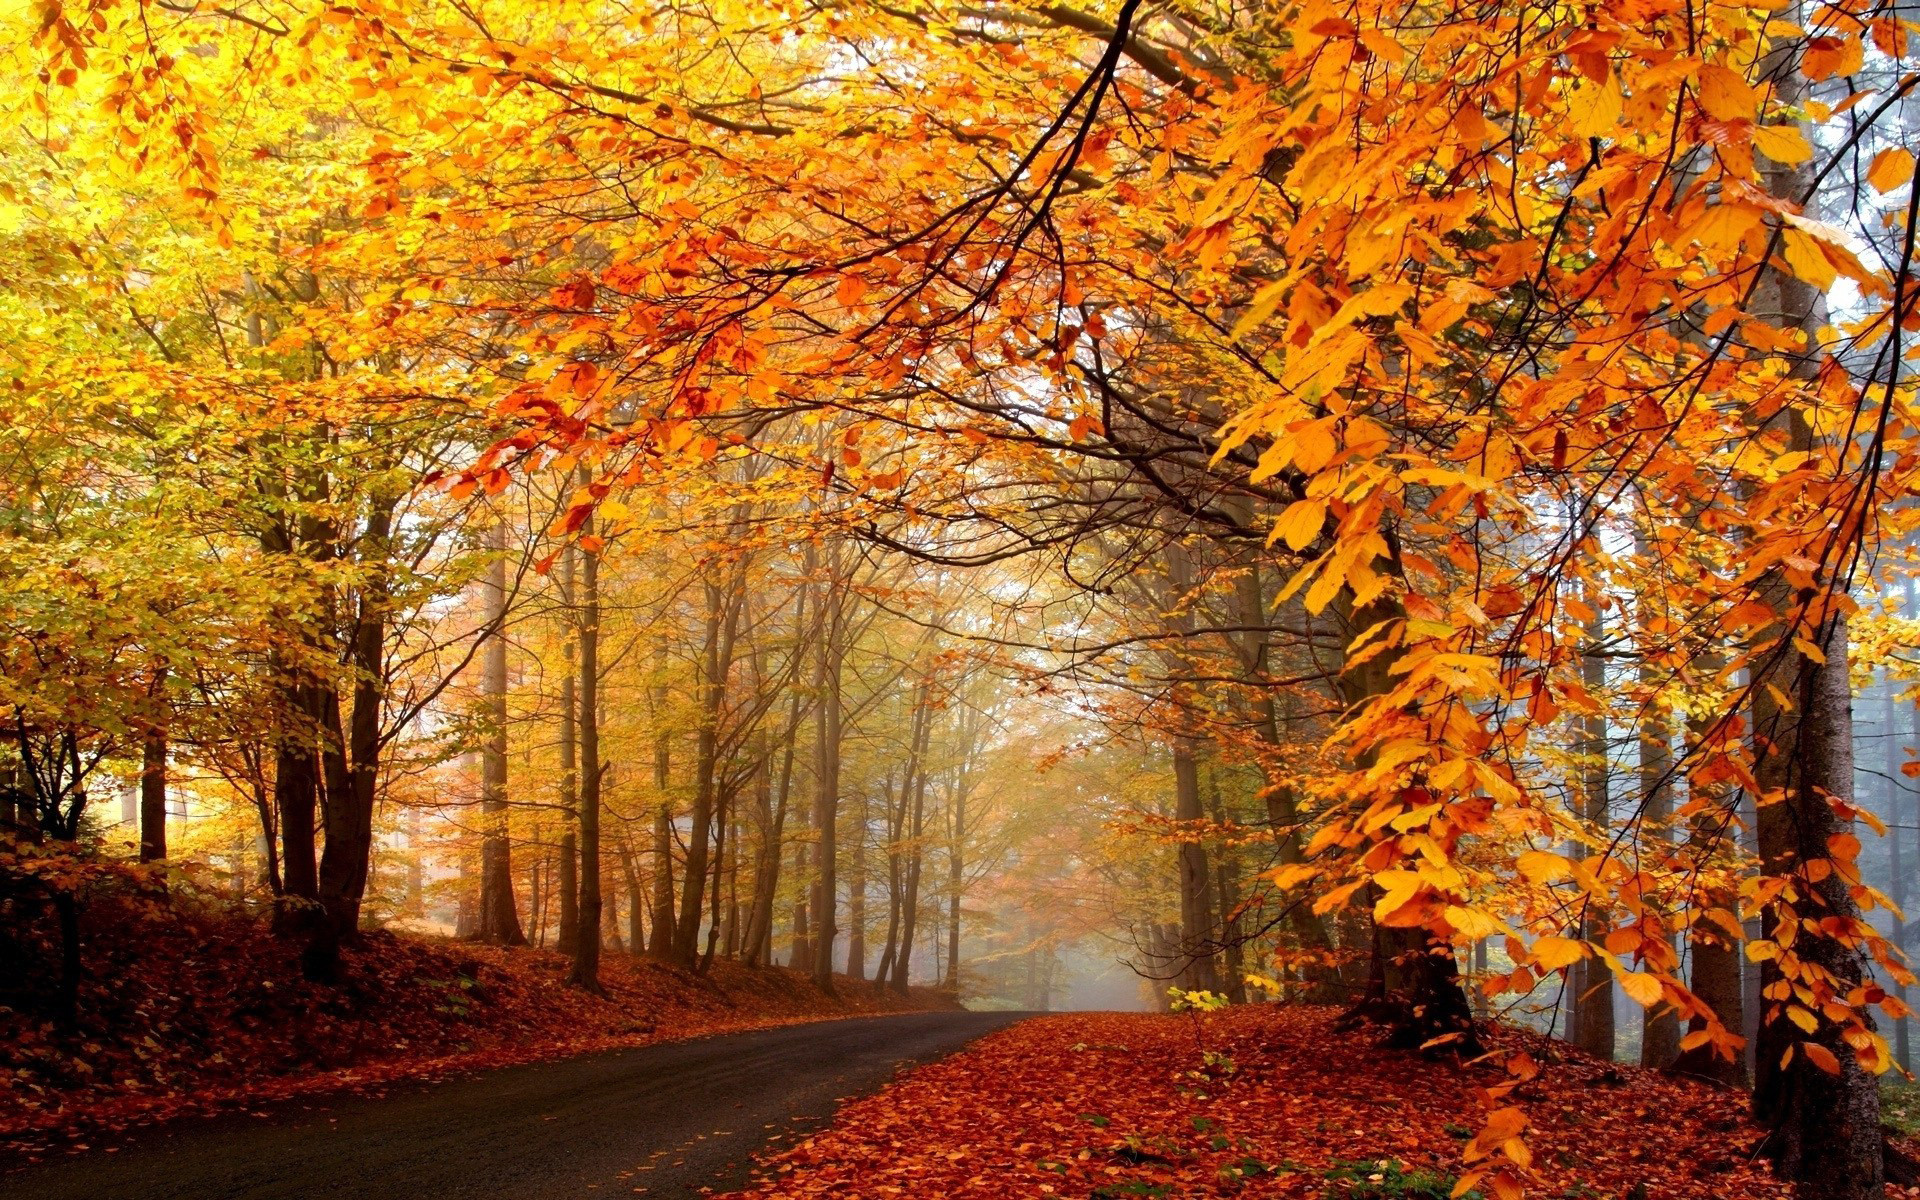 Autumn In Fall Scenery Wallpapers Background Picture Of Fall Scenes  Background Image And Wallpaper for Free Download